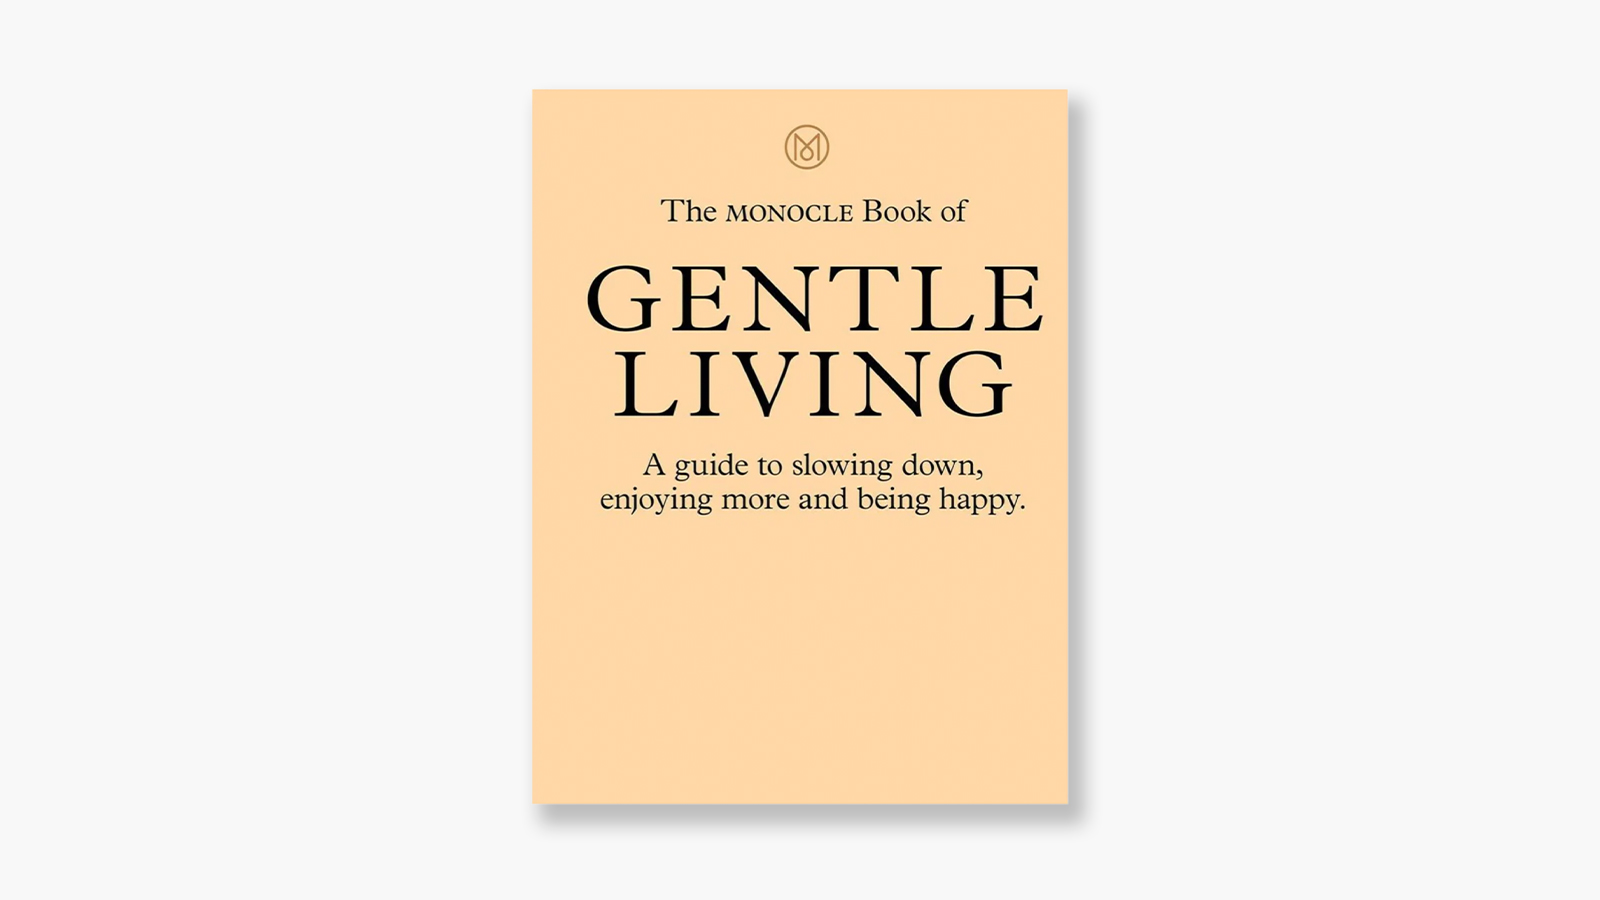 ‘The Monocle Book of Gentle Living’